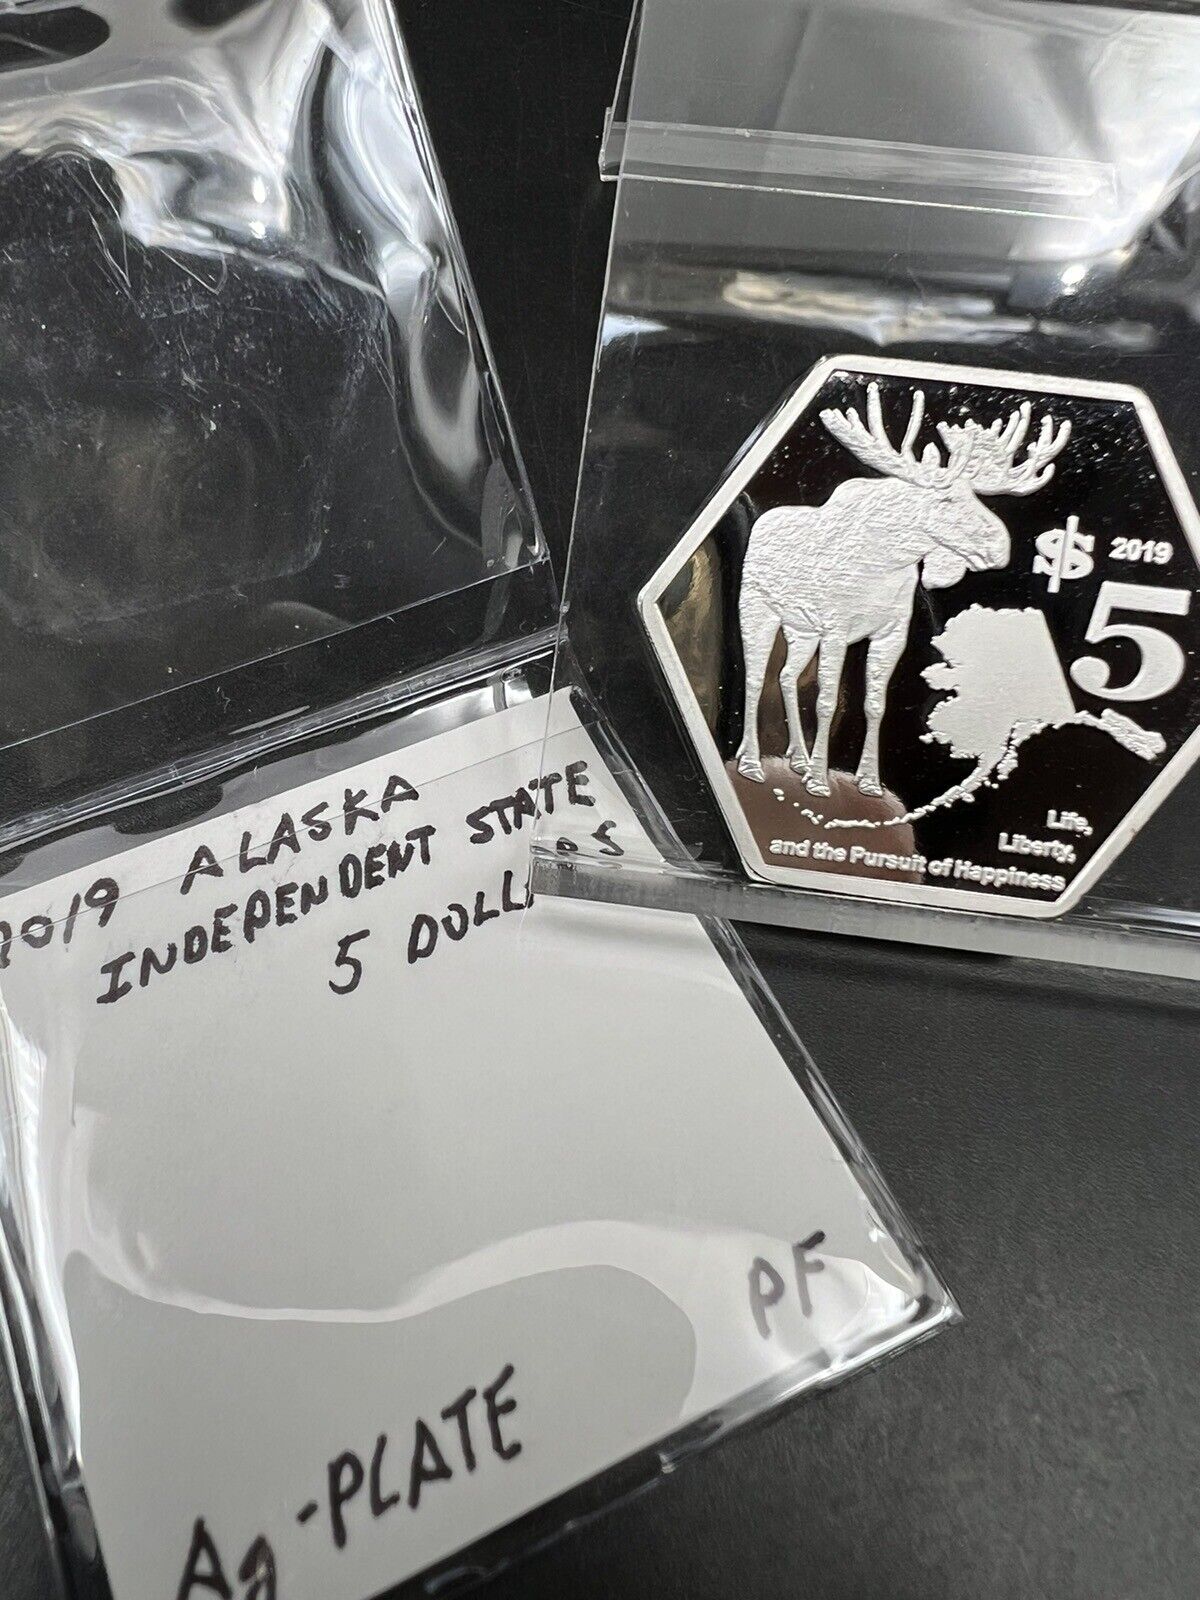 2019 Independent State Of Alaska 5 Dollars Choice Proof Silver Plated Medal